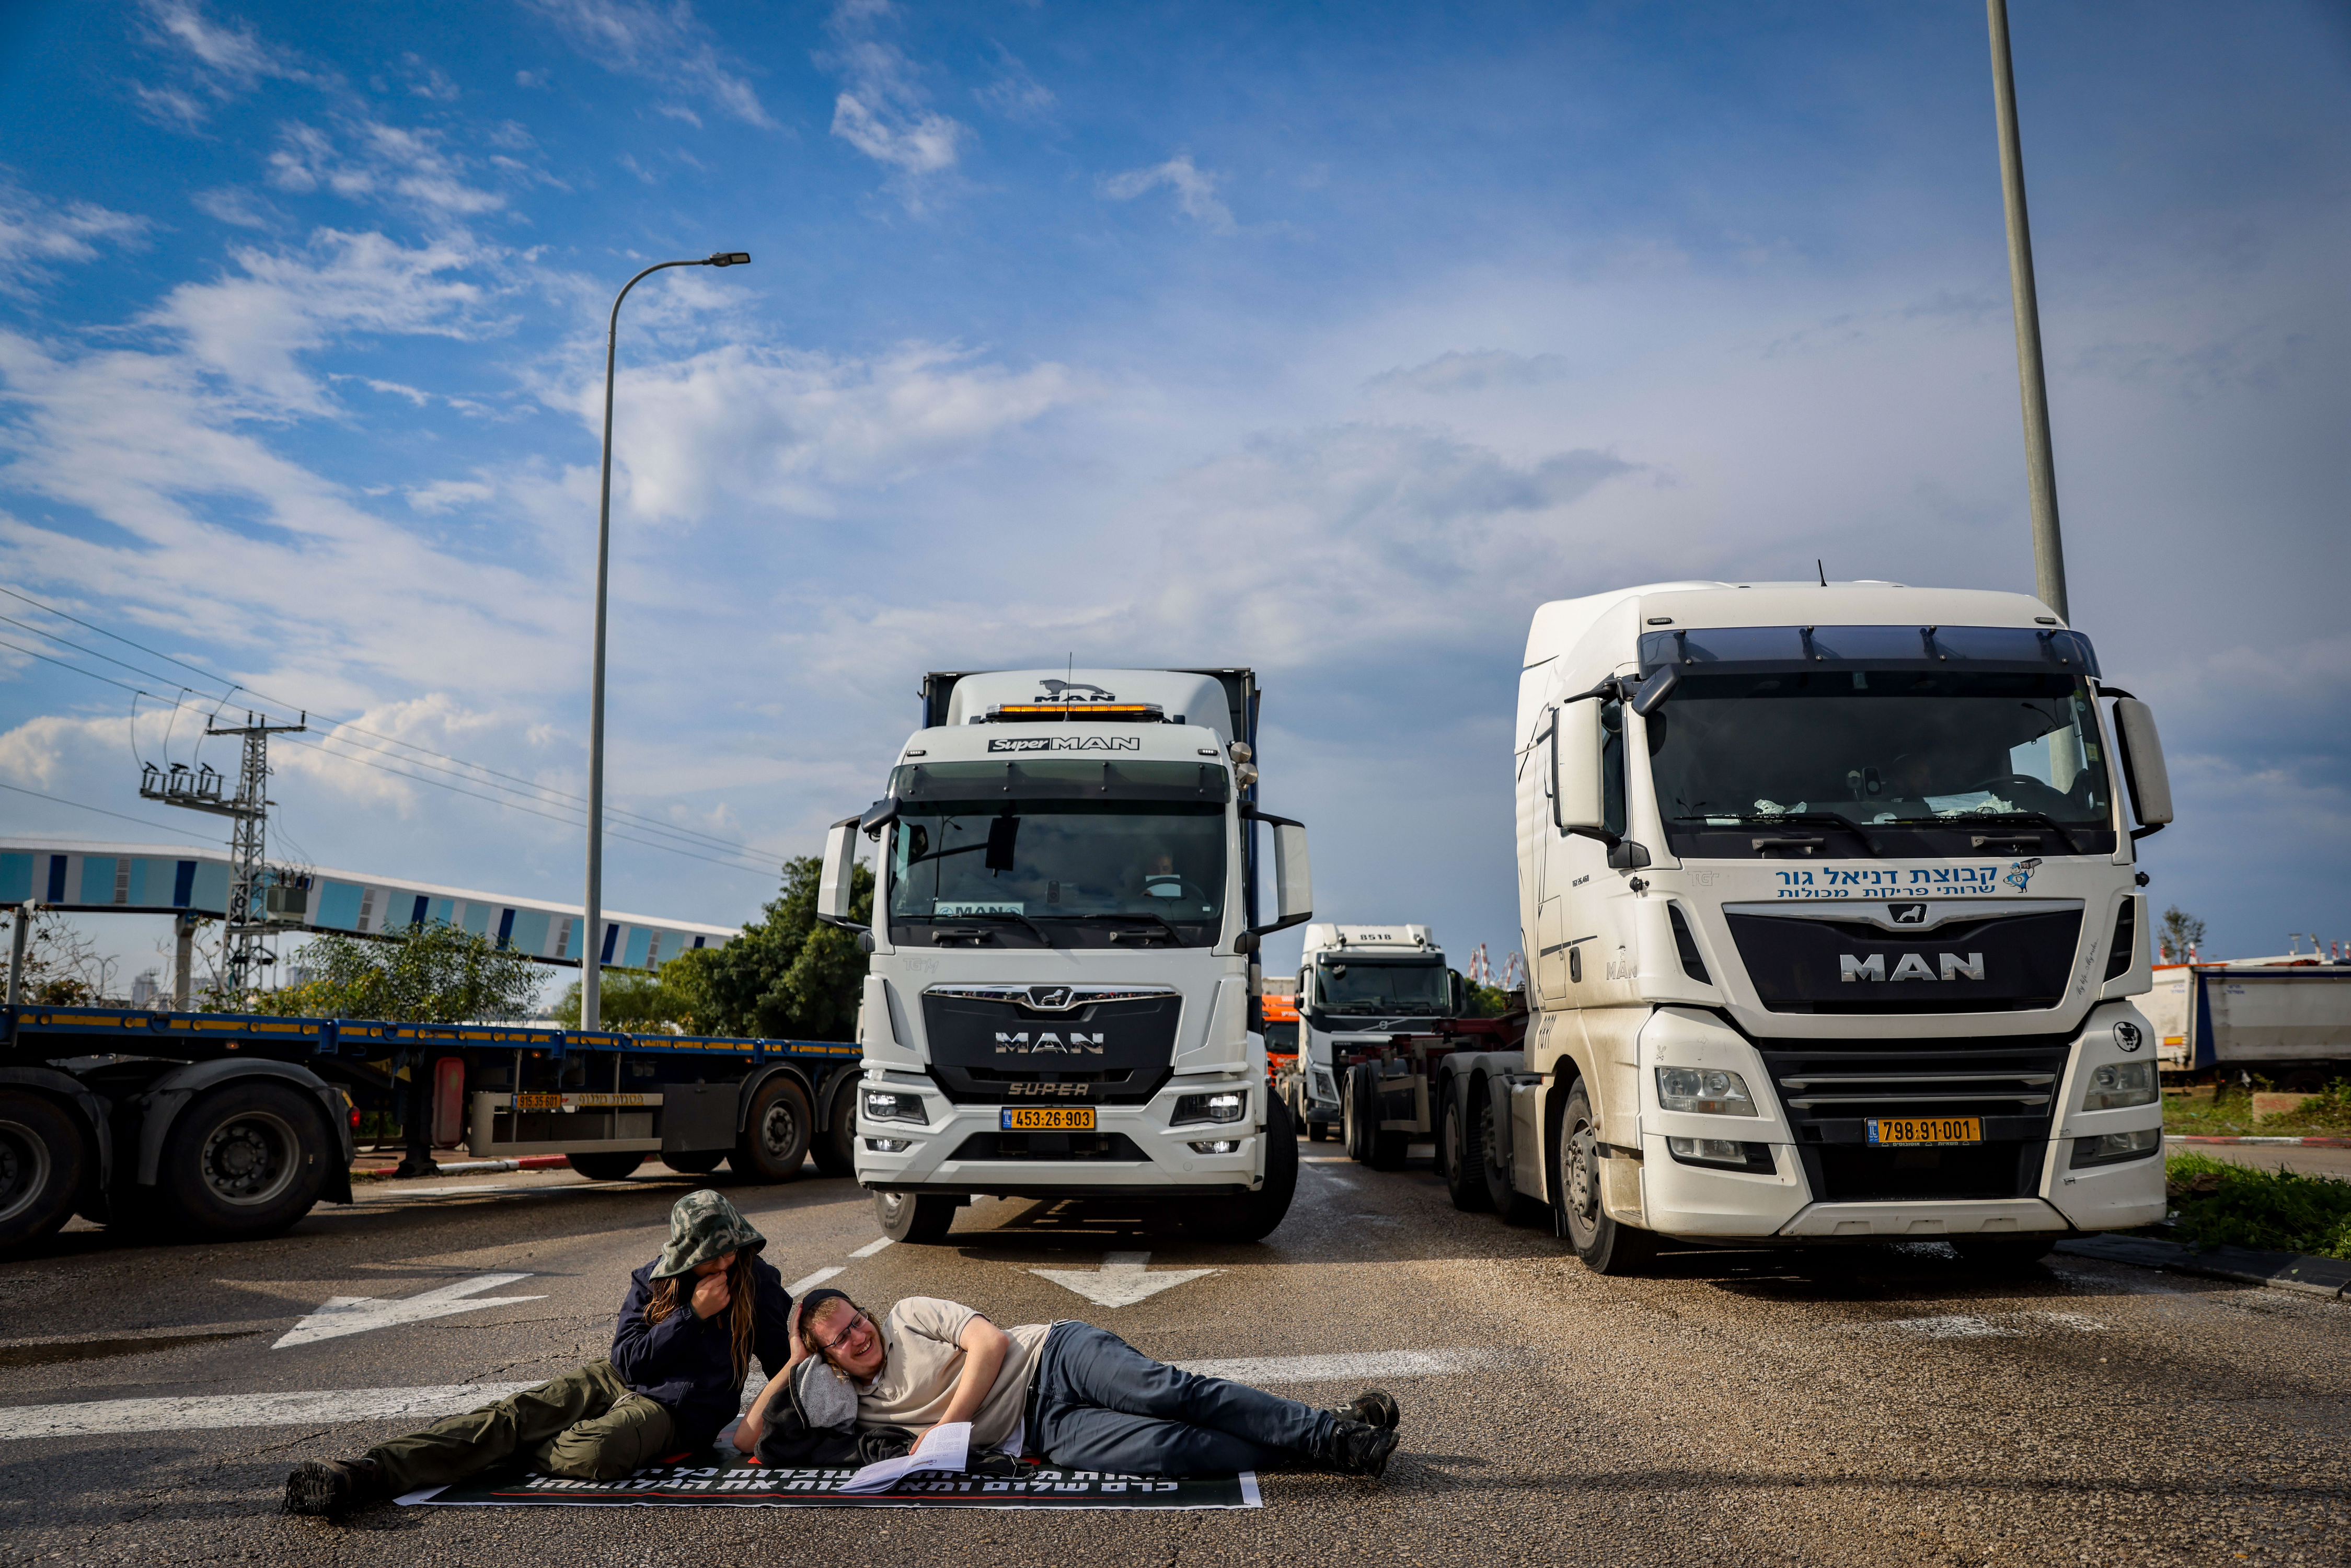 Day 182 - Israel to open port, border crossing to get aid to Gaza